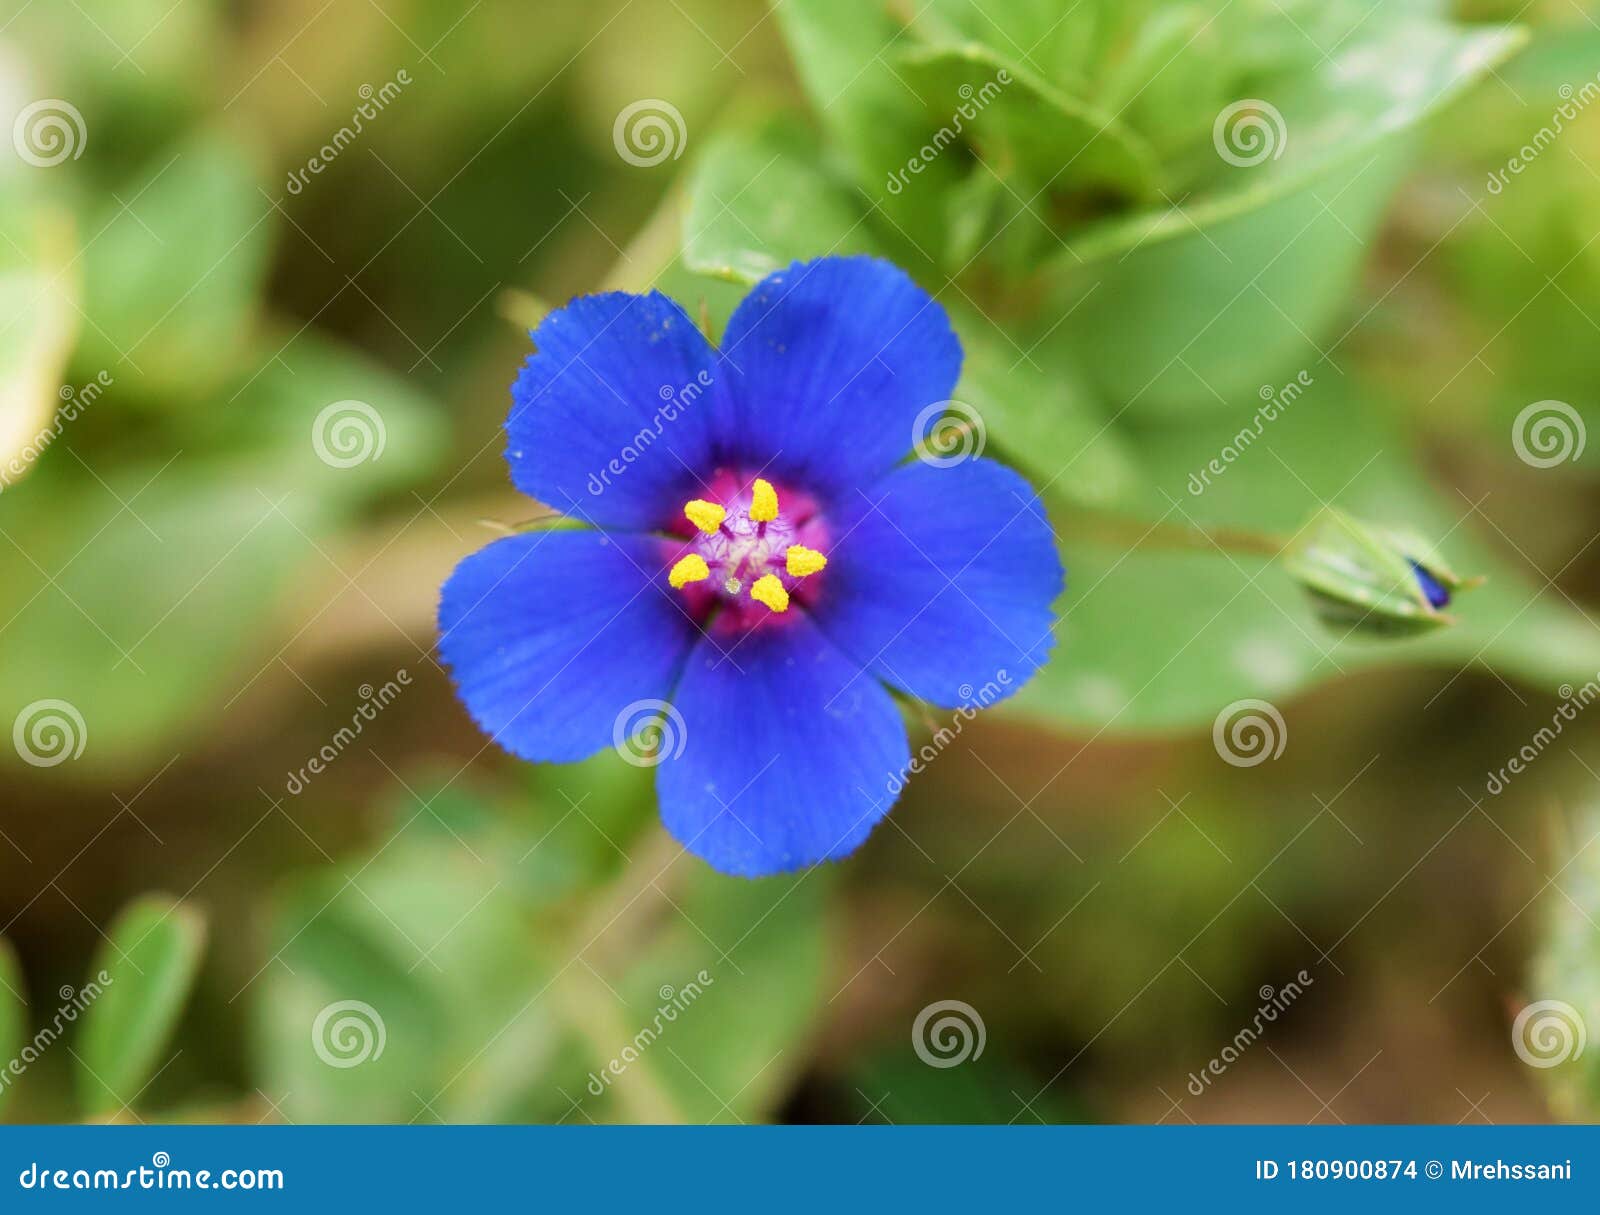 lysimachia arvensis, commonly known as scarlet pimpernel flower , flora iran